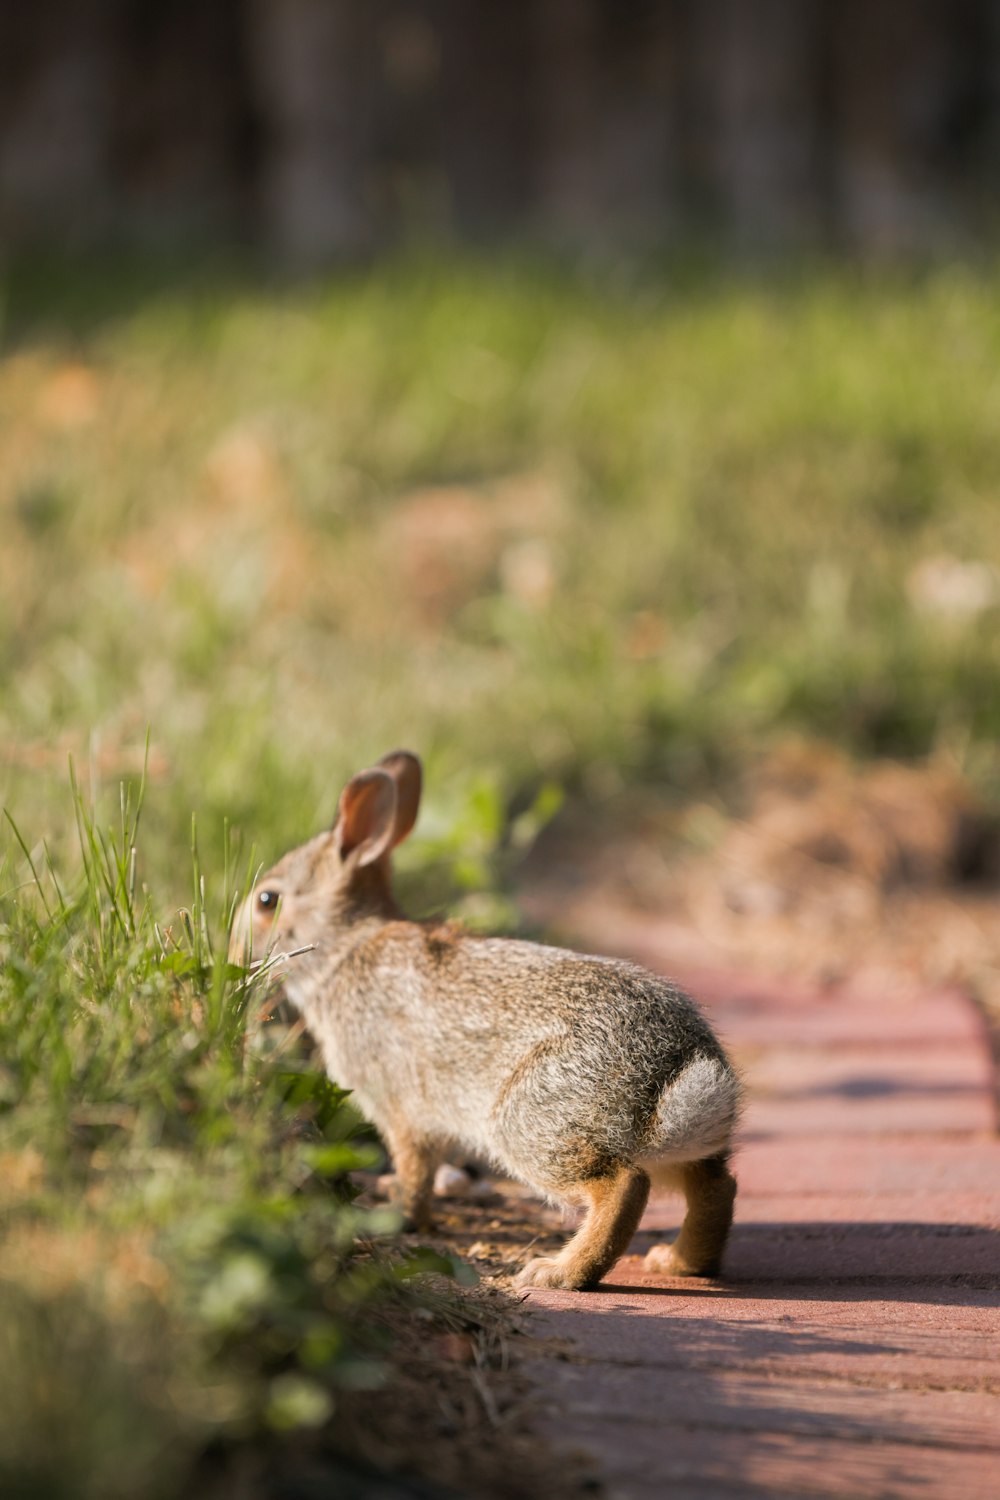 a small rabbit standing on a brick walkway